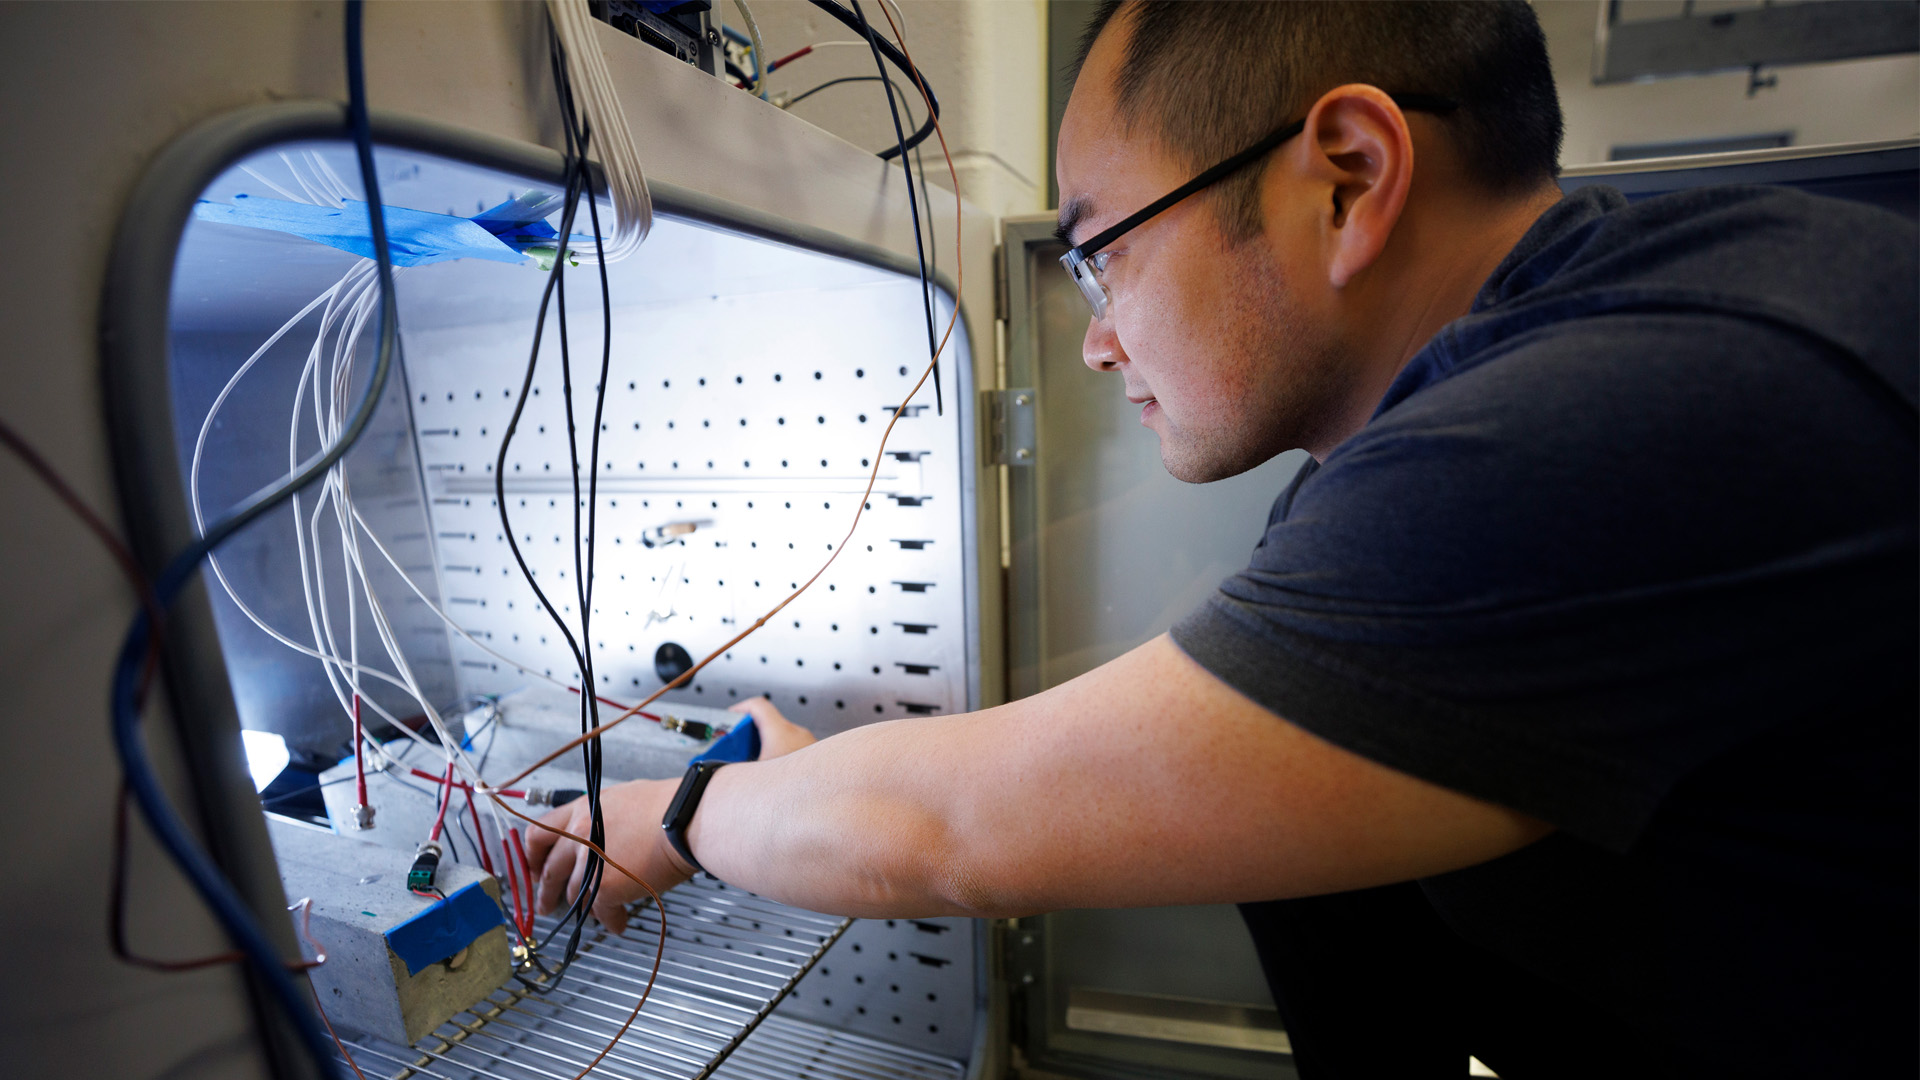 Bibo Zhong, doctoral student in civil and environmental engineering, investigates thermally induced nonlinear acoustic effect. Zhong will join Idaho National Laboratory as a postdoctoral researcher.